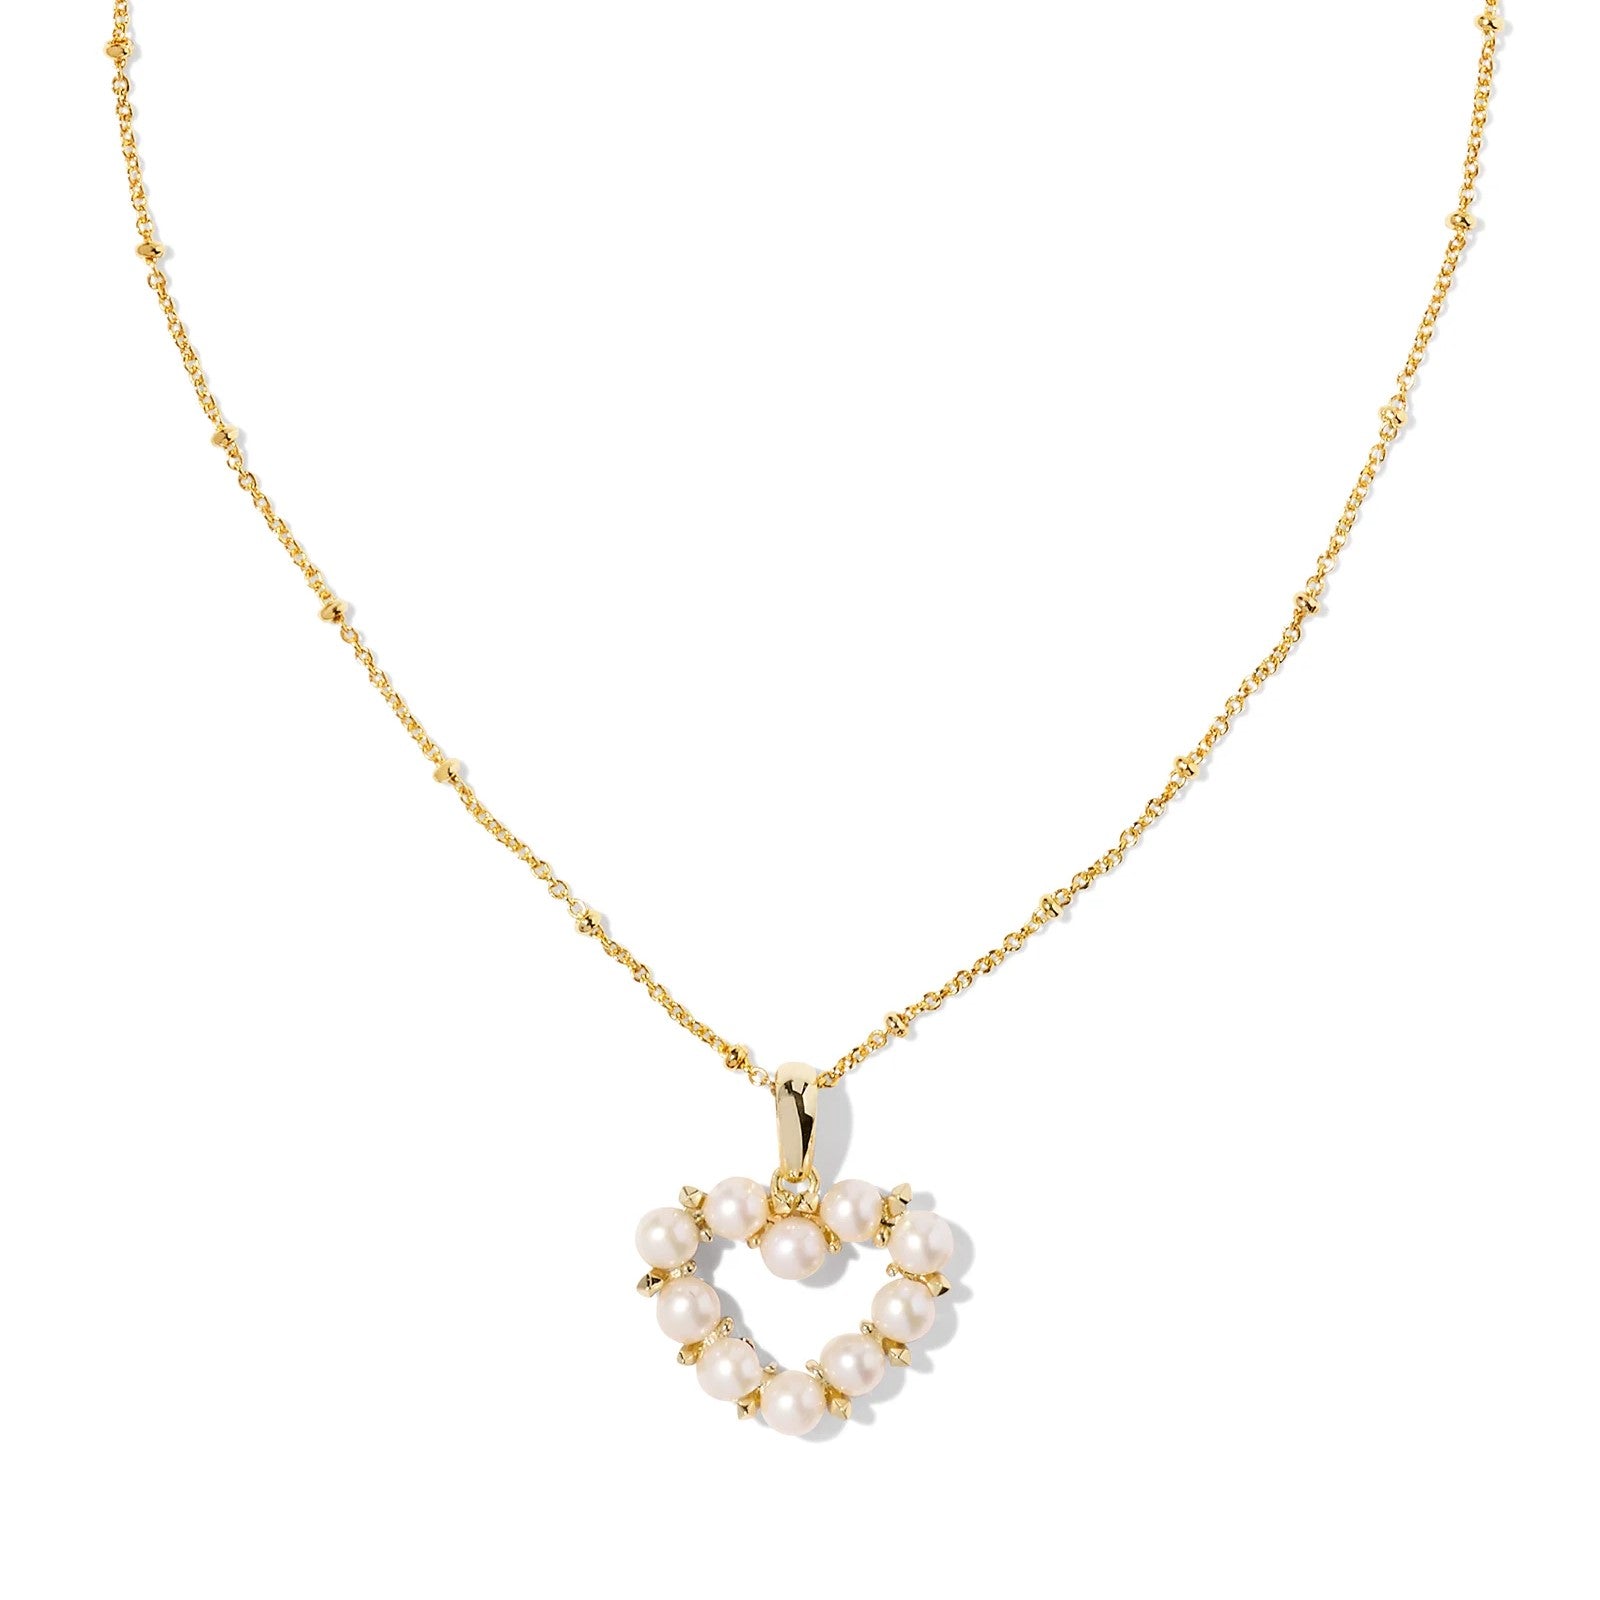 Kendra Scott | Ashton Gold Heart Short Pendant Necklace in White Pearl - Giddy Up Glamour Boutique